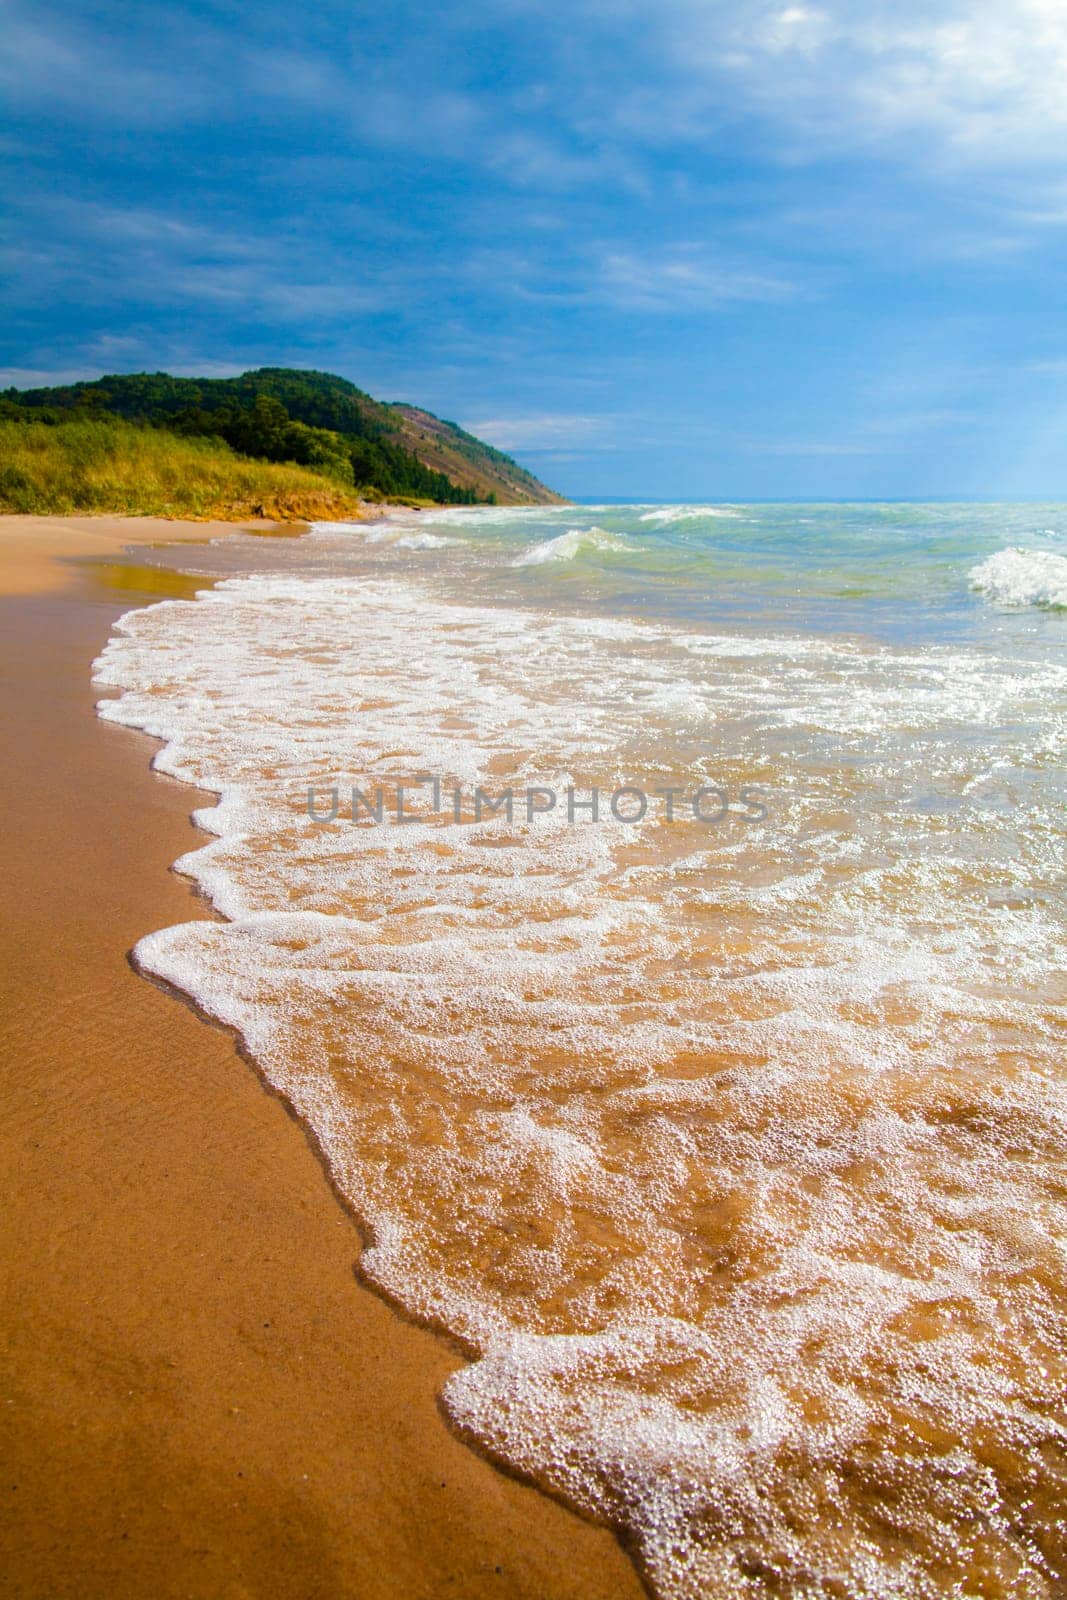 Tranquil Michigan Beach with Frothy Waves and Lush Hillside by njproductions